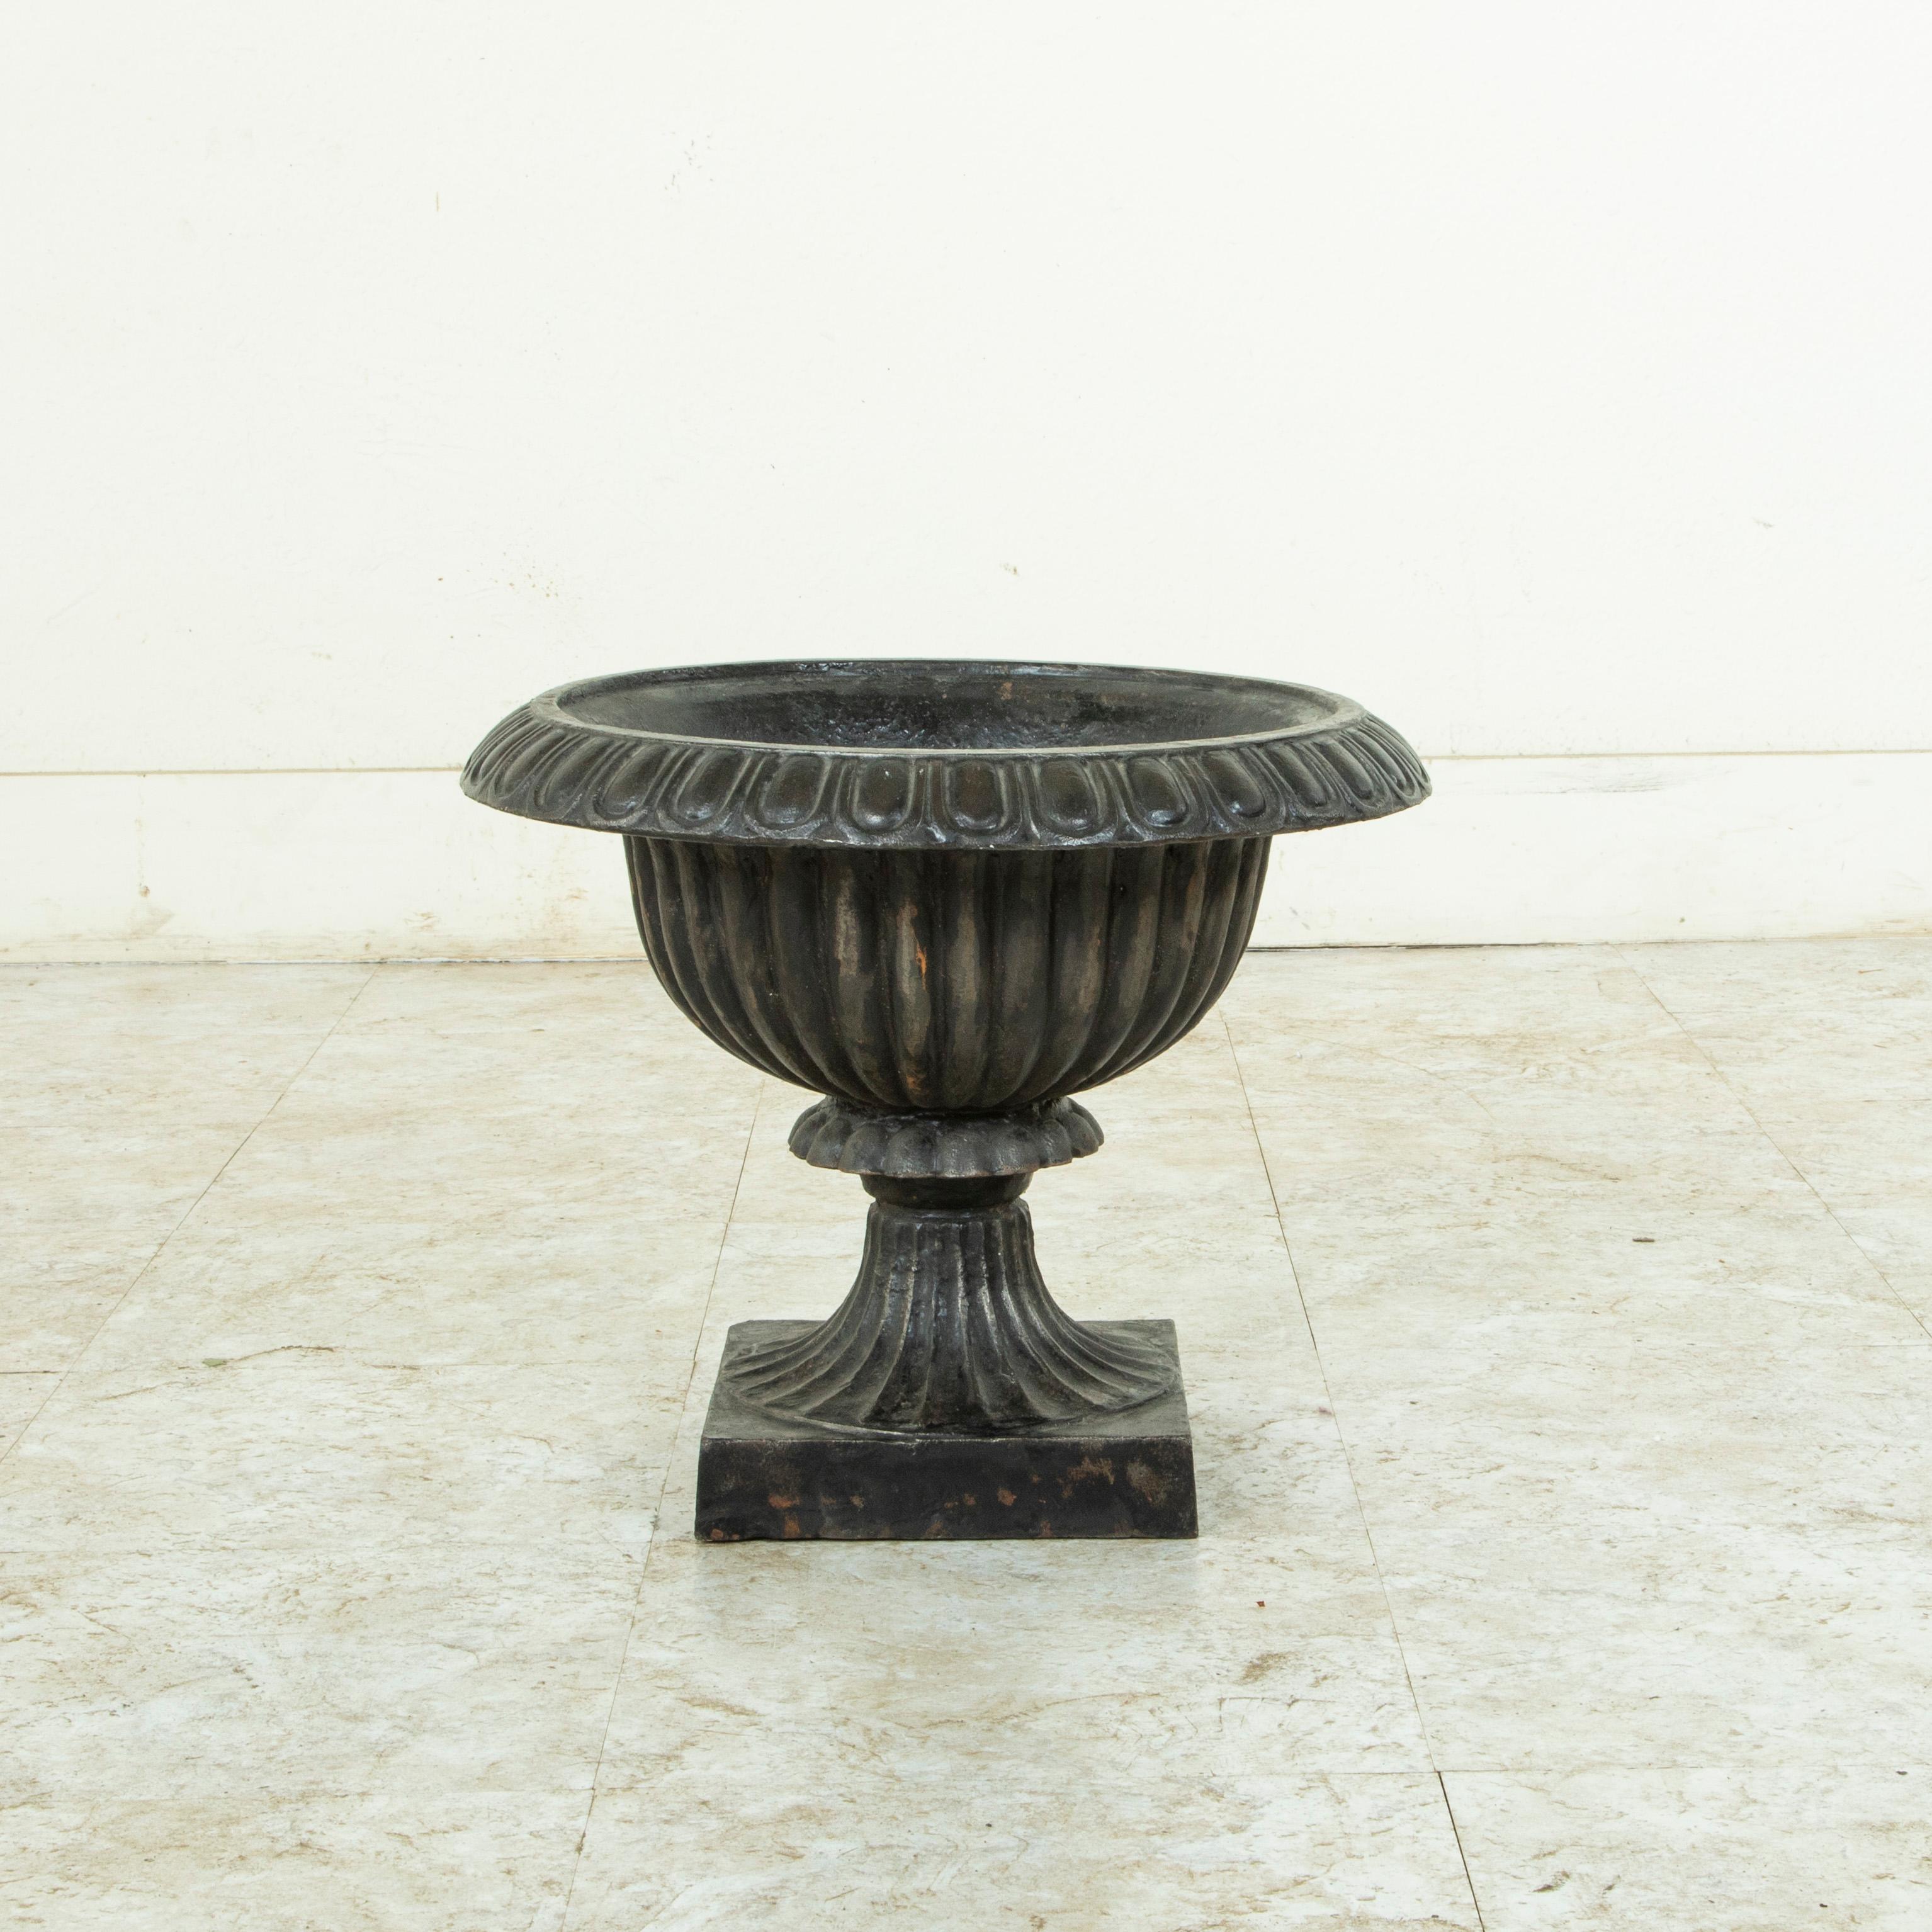 Early 20th Century Large French Cast Iron Planter, Jardinière, or Urn, circa 1900